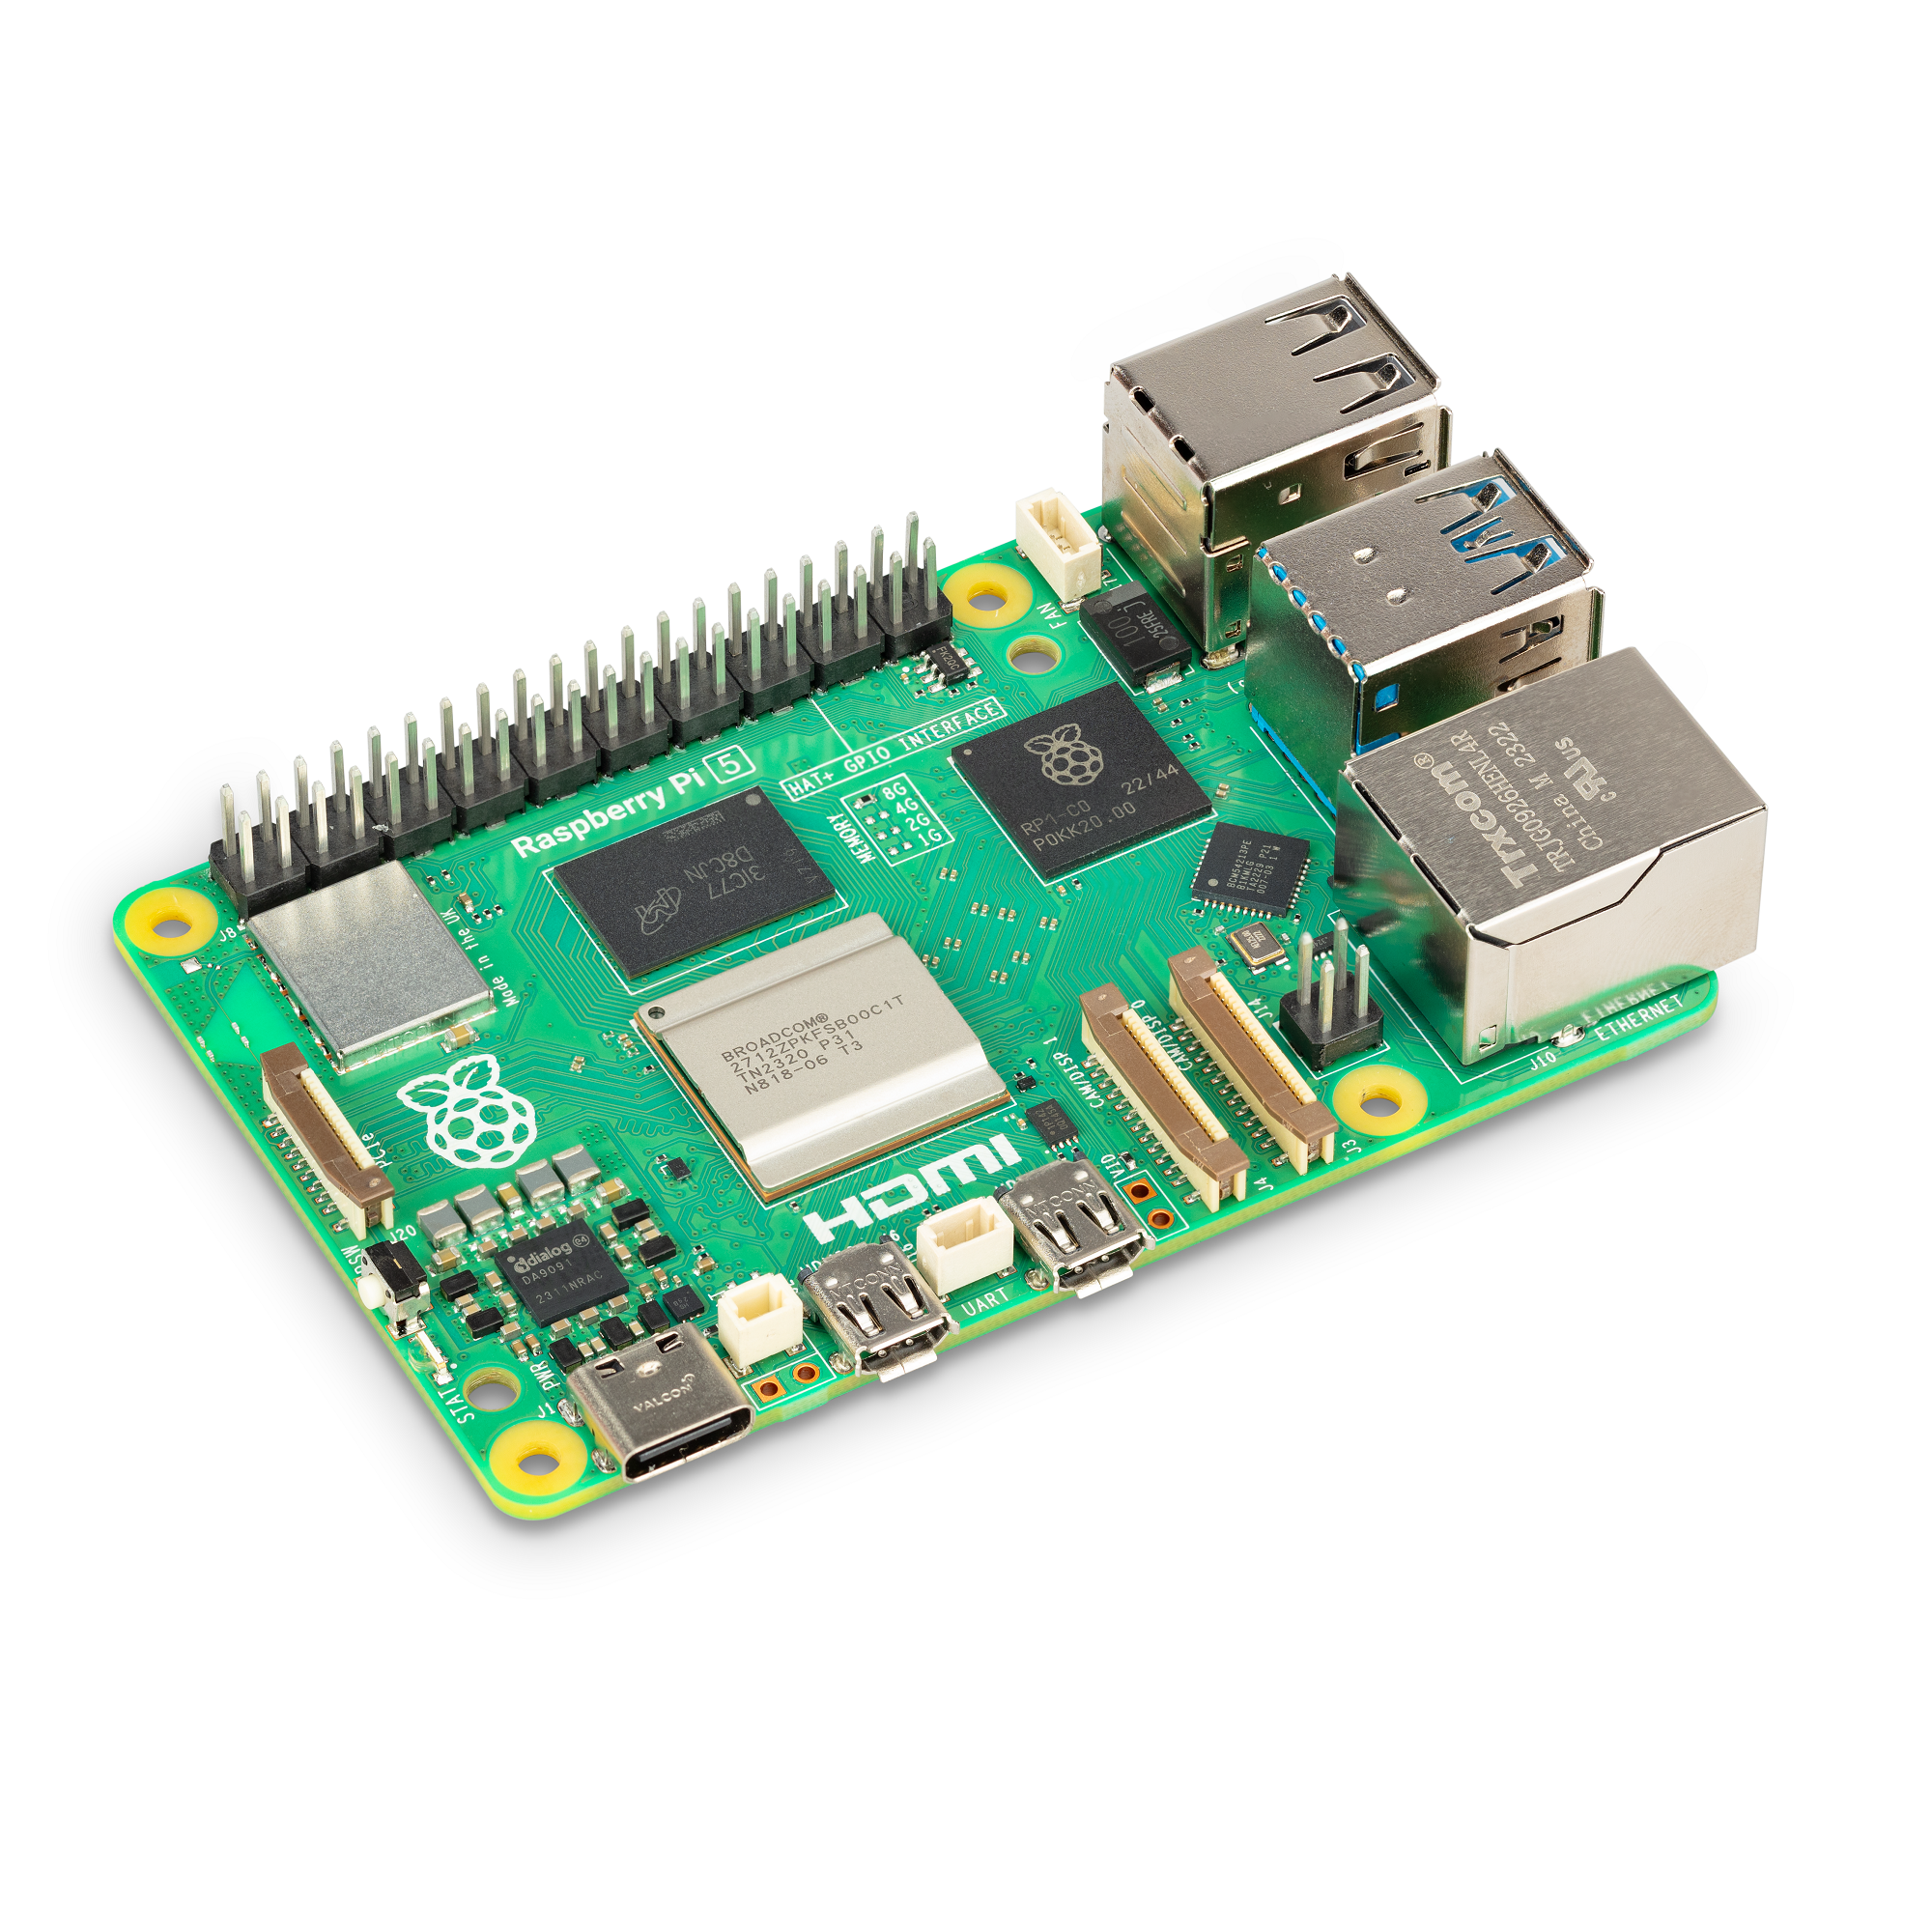 The Right Wireless Chipset For Orange Pi 5 Plus On 5Ghz - For